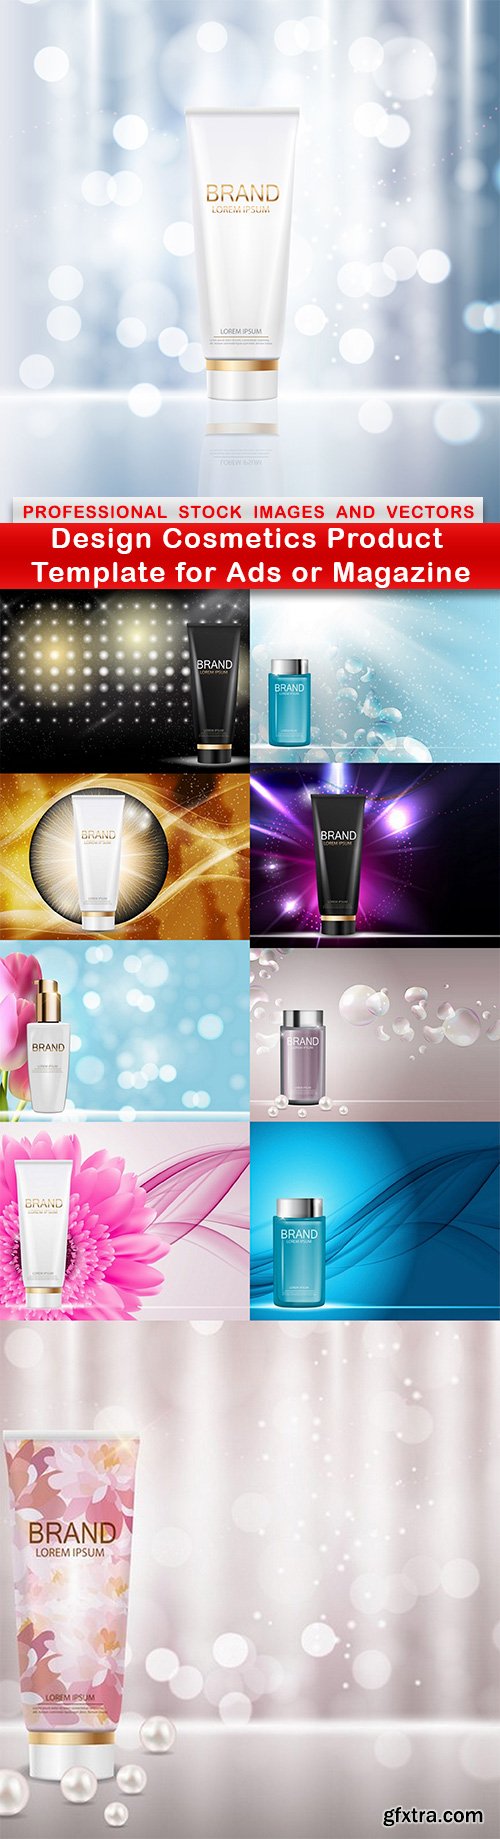 Design Cosmetics Product Template for Ads or Magazine - 10 EPS